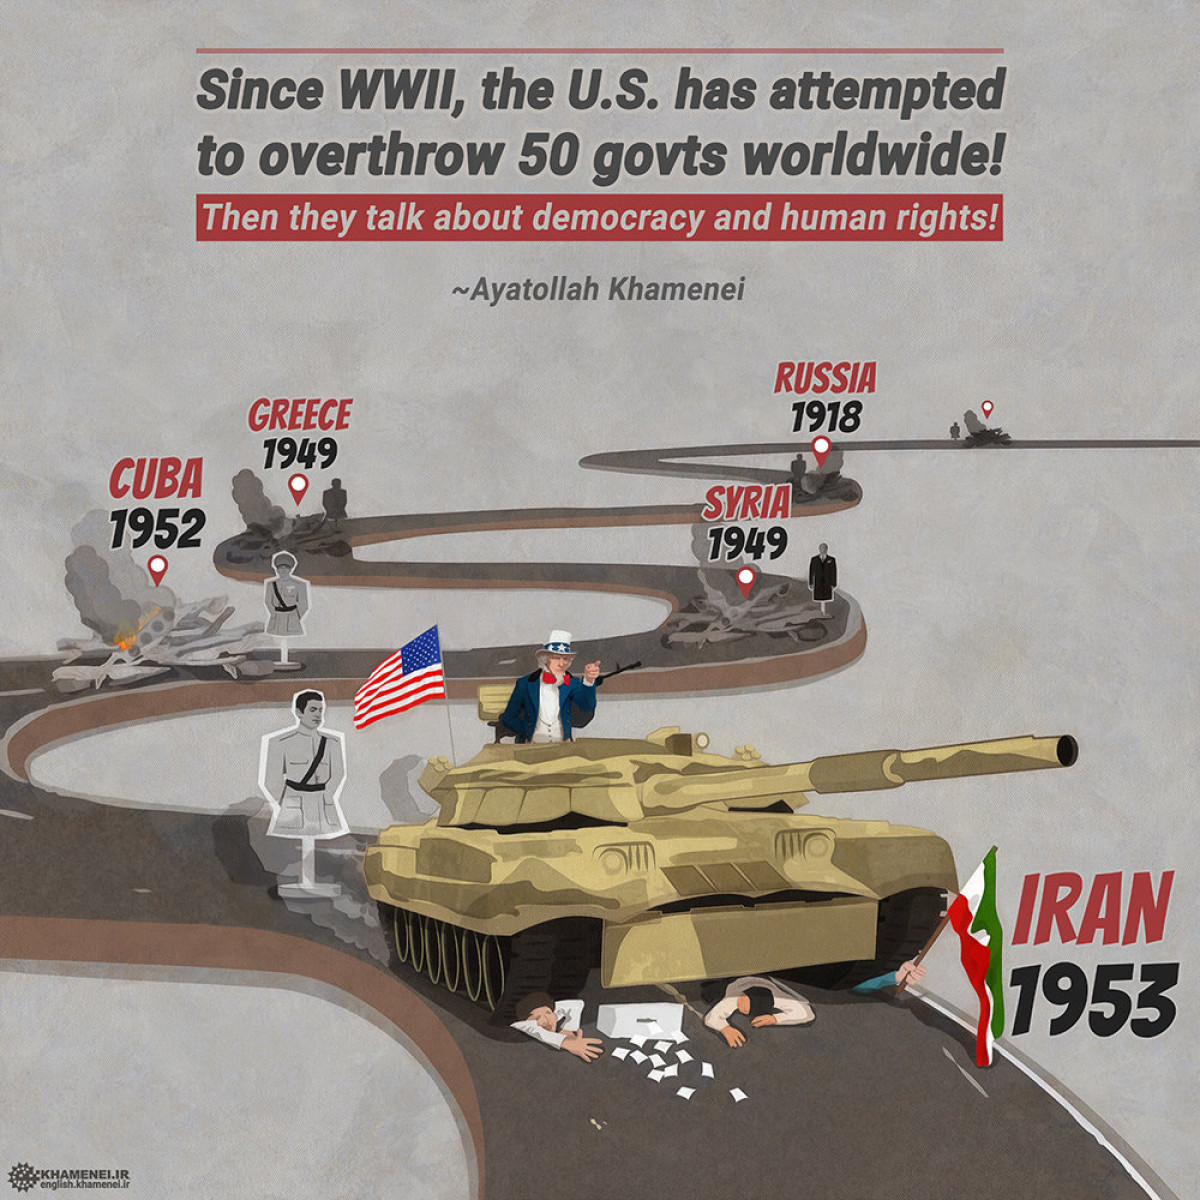 From the 1953 coup to Iran nuclear talks, U.S. never gives up viciousness